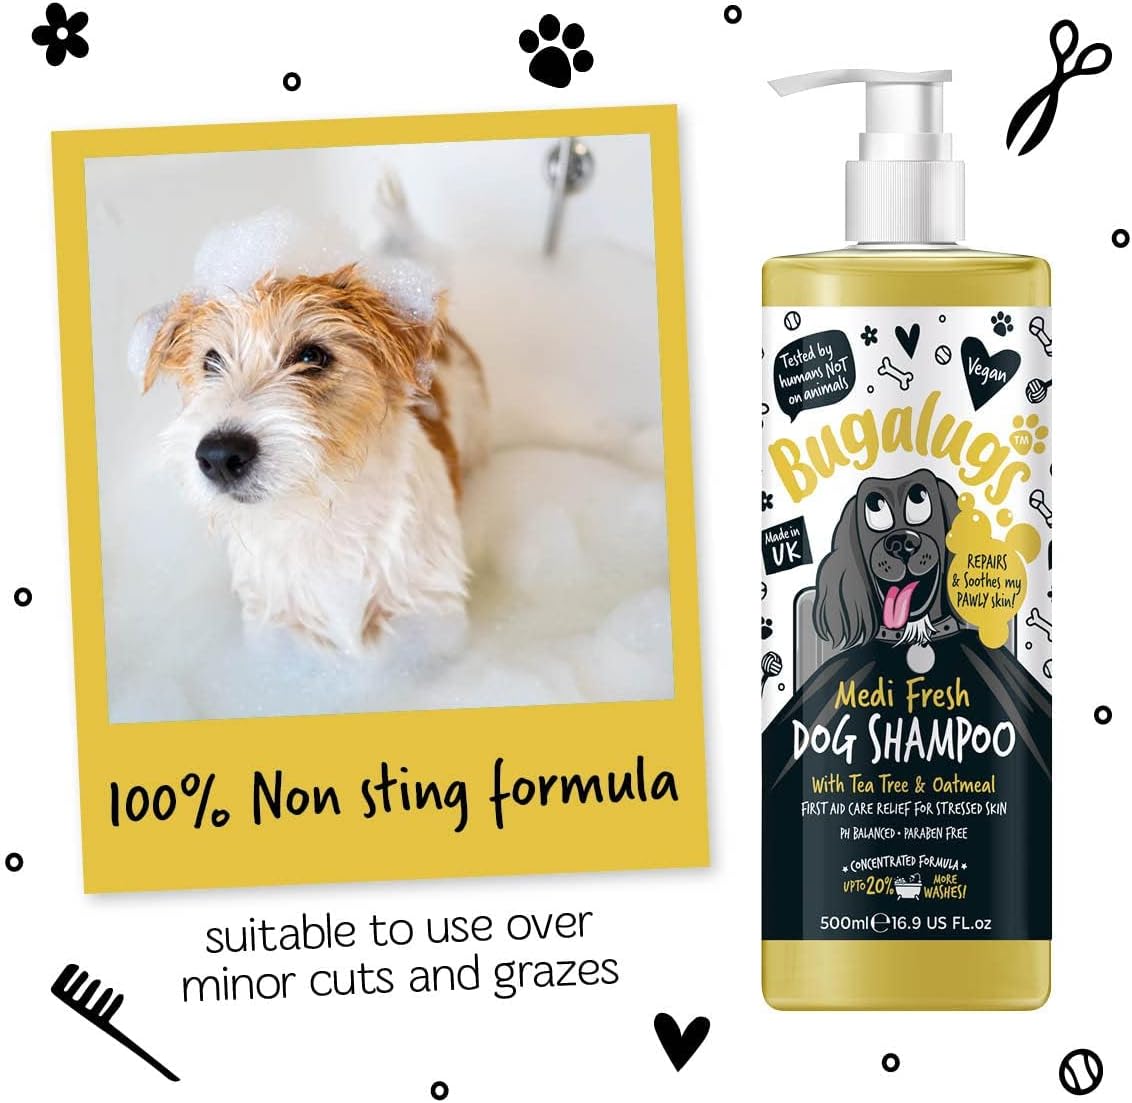 BUGALUGS Dog Shampoo for Itchy Skin Antibacterial And Antifungal Natural Medicated Safe Sensitive Formula - Fast Absorbing Skin Cooling First Aid relief For Cuts Grazes Skin Irritation :Pet Supplies